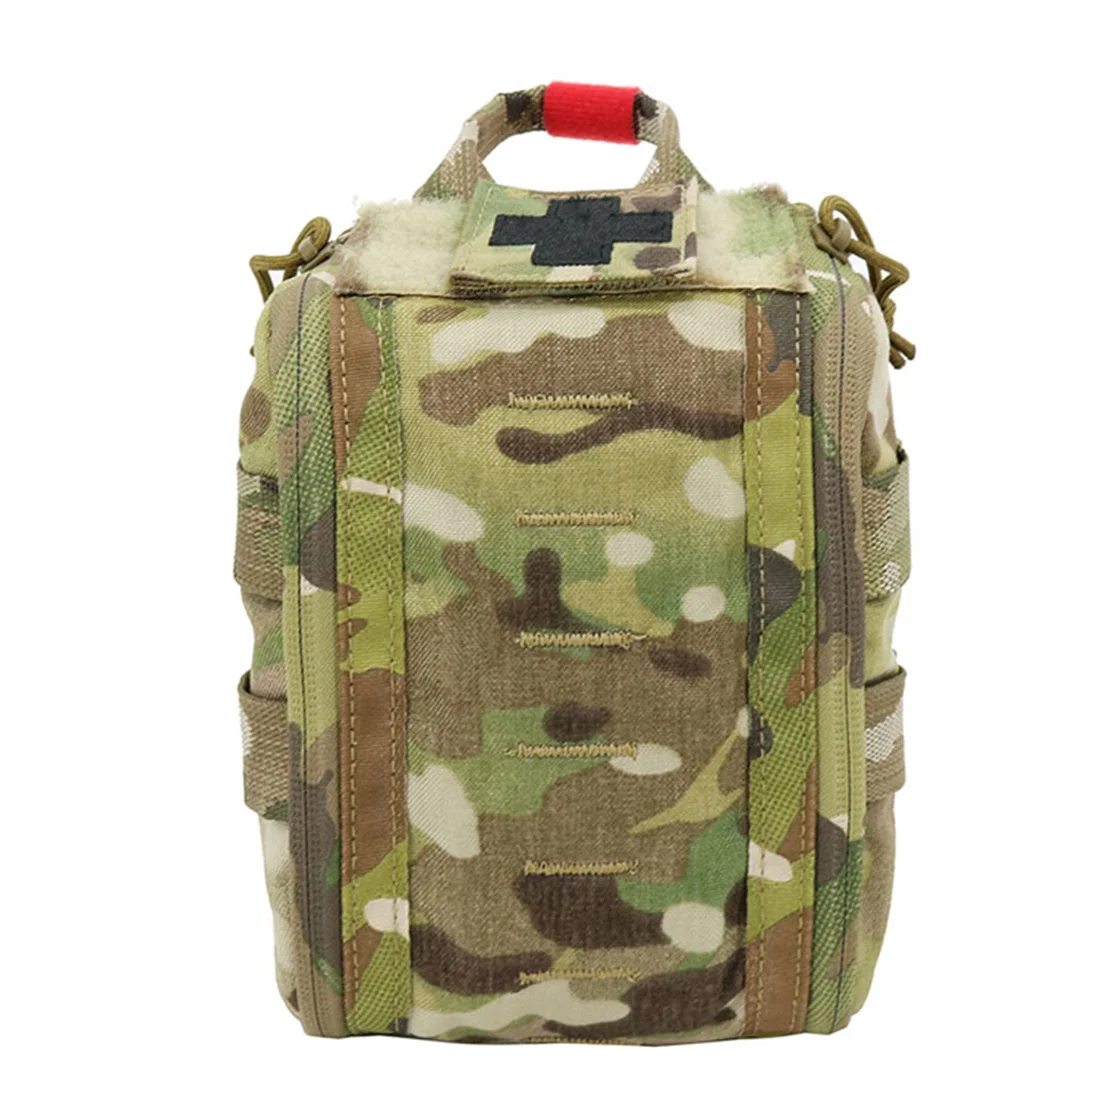 ITS 500D Cordura Tactical Hunting Medical Pouch First Aid Molle Accessories Pouch - Multicam  - buy with discount